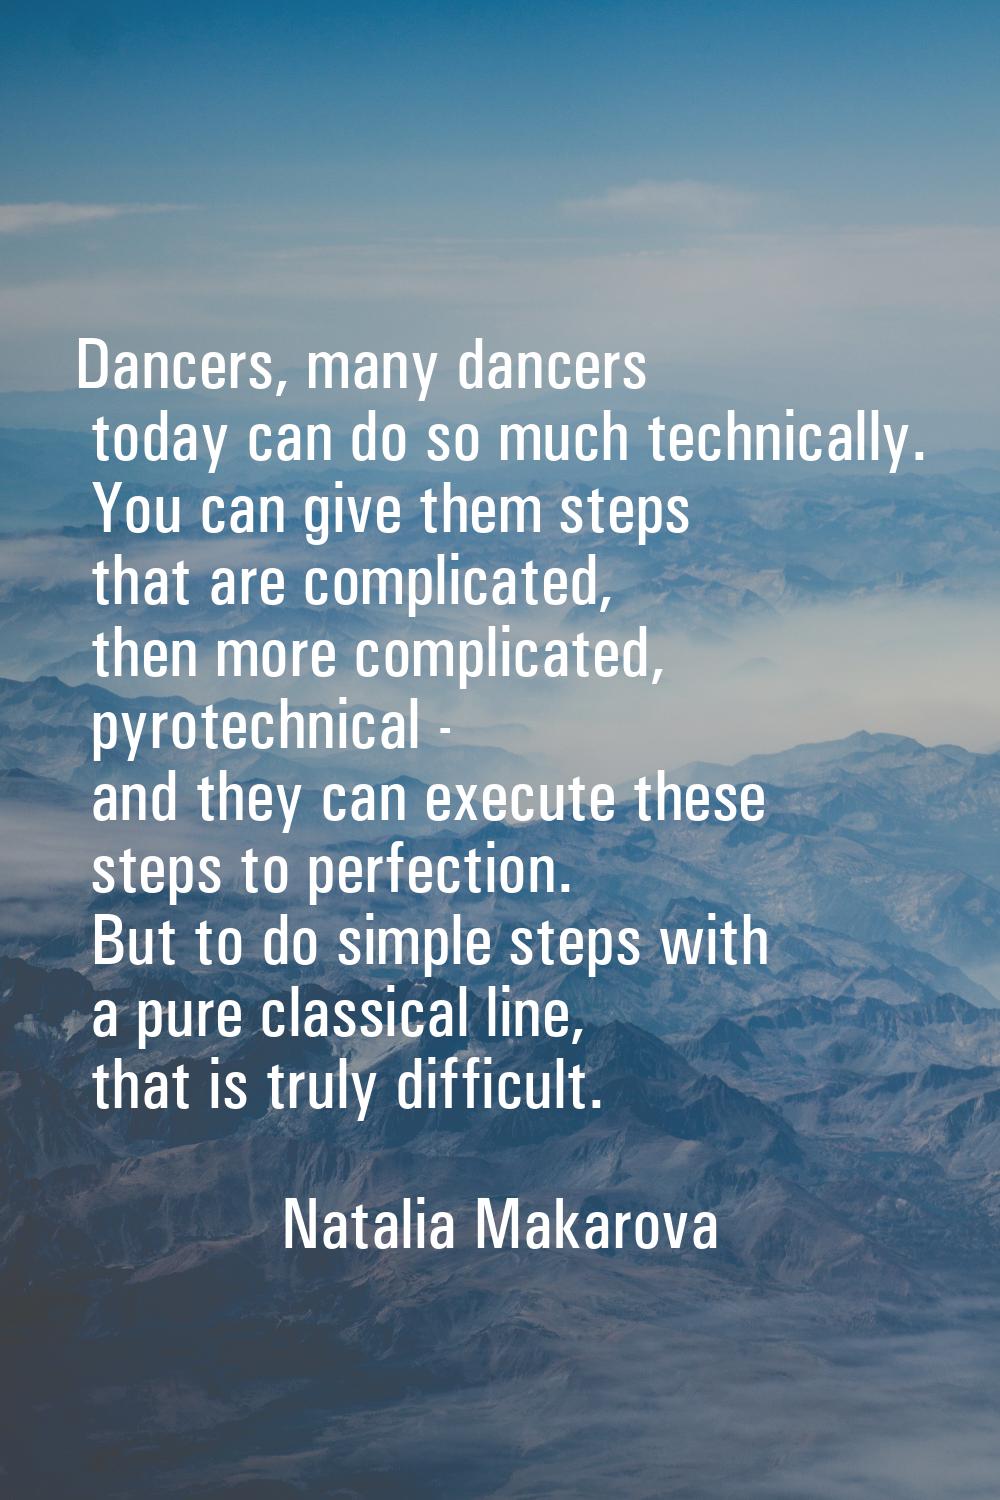 Dancers, many dancers today can do so much technically. You can give them steps that are complicate